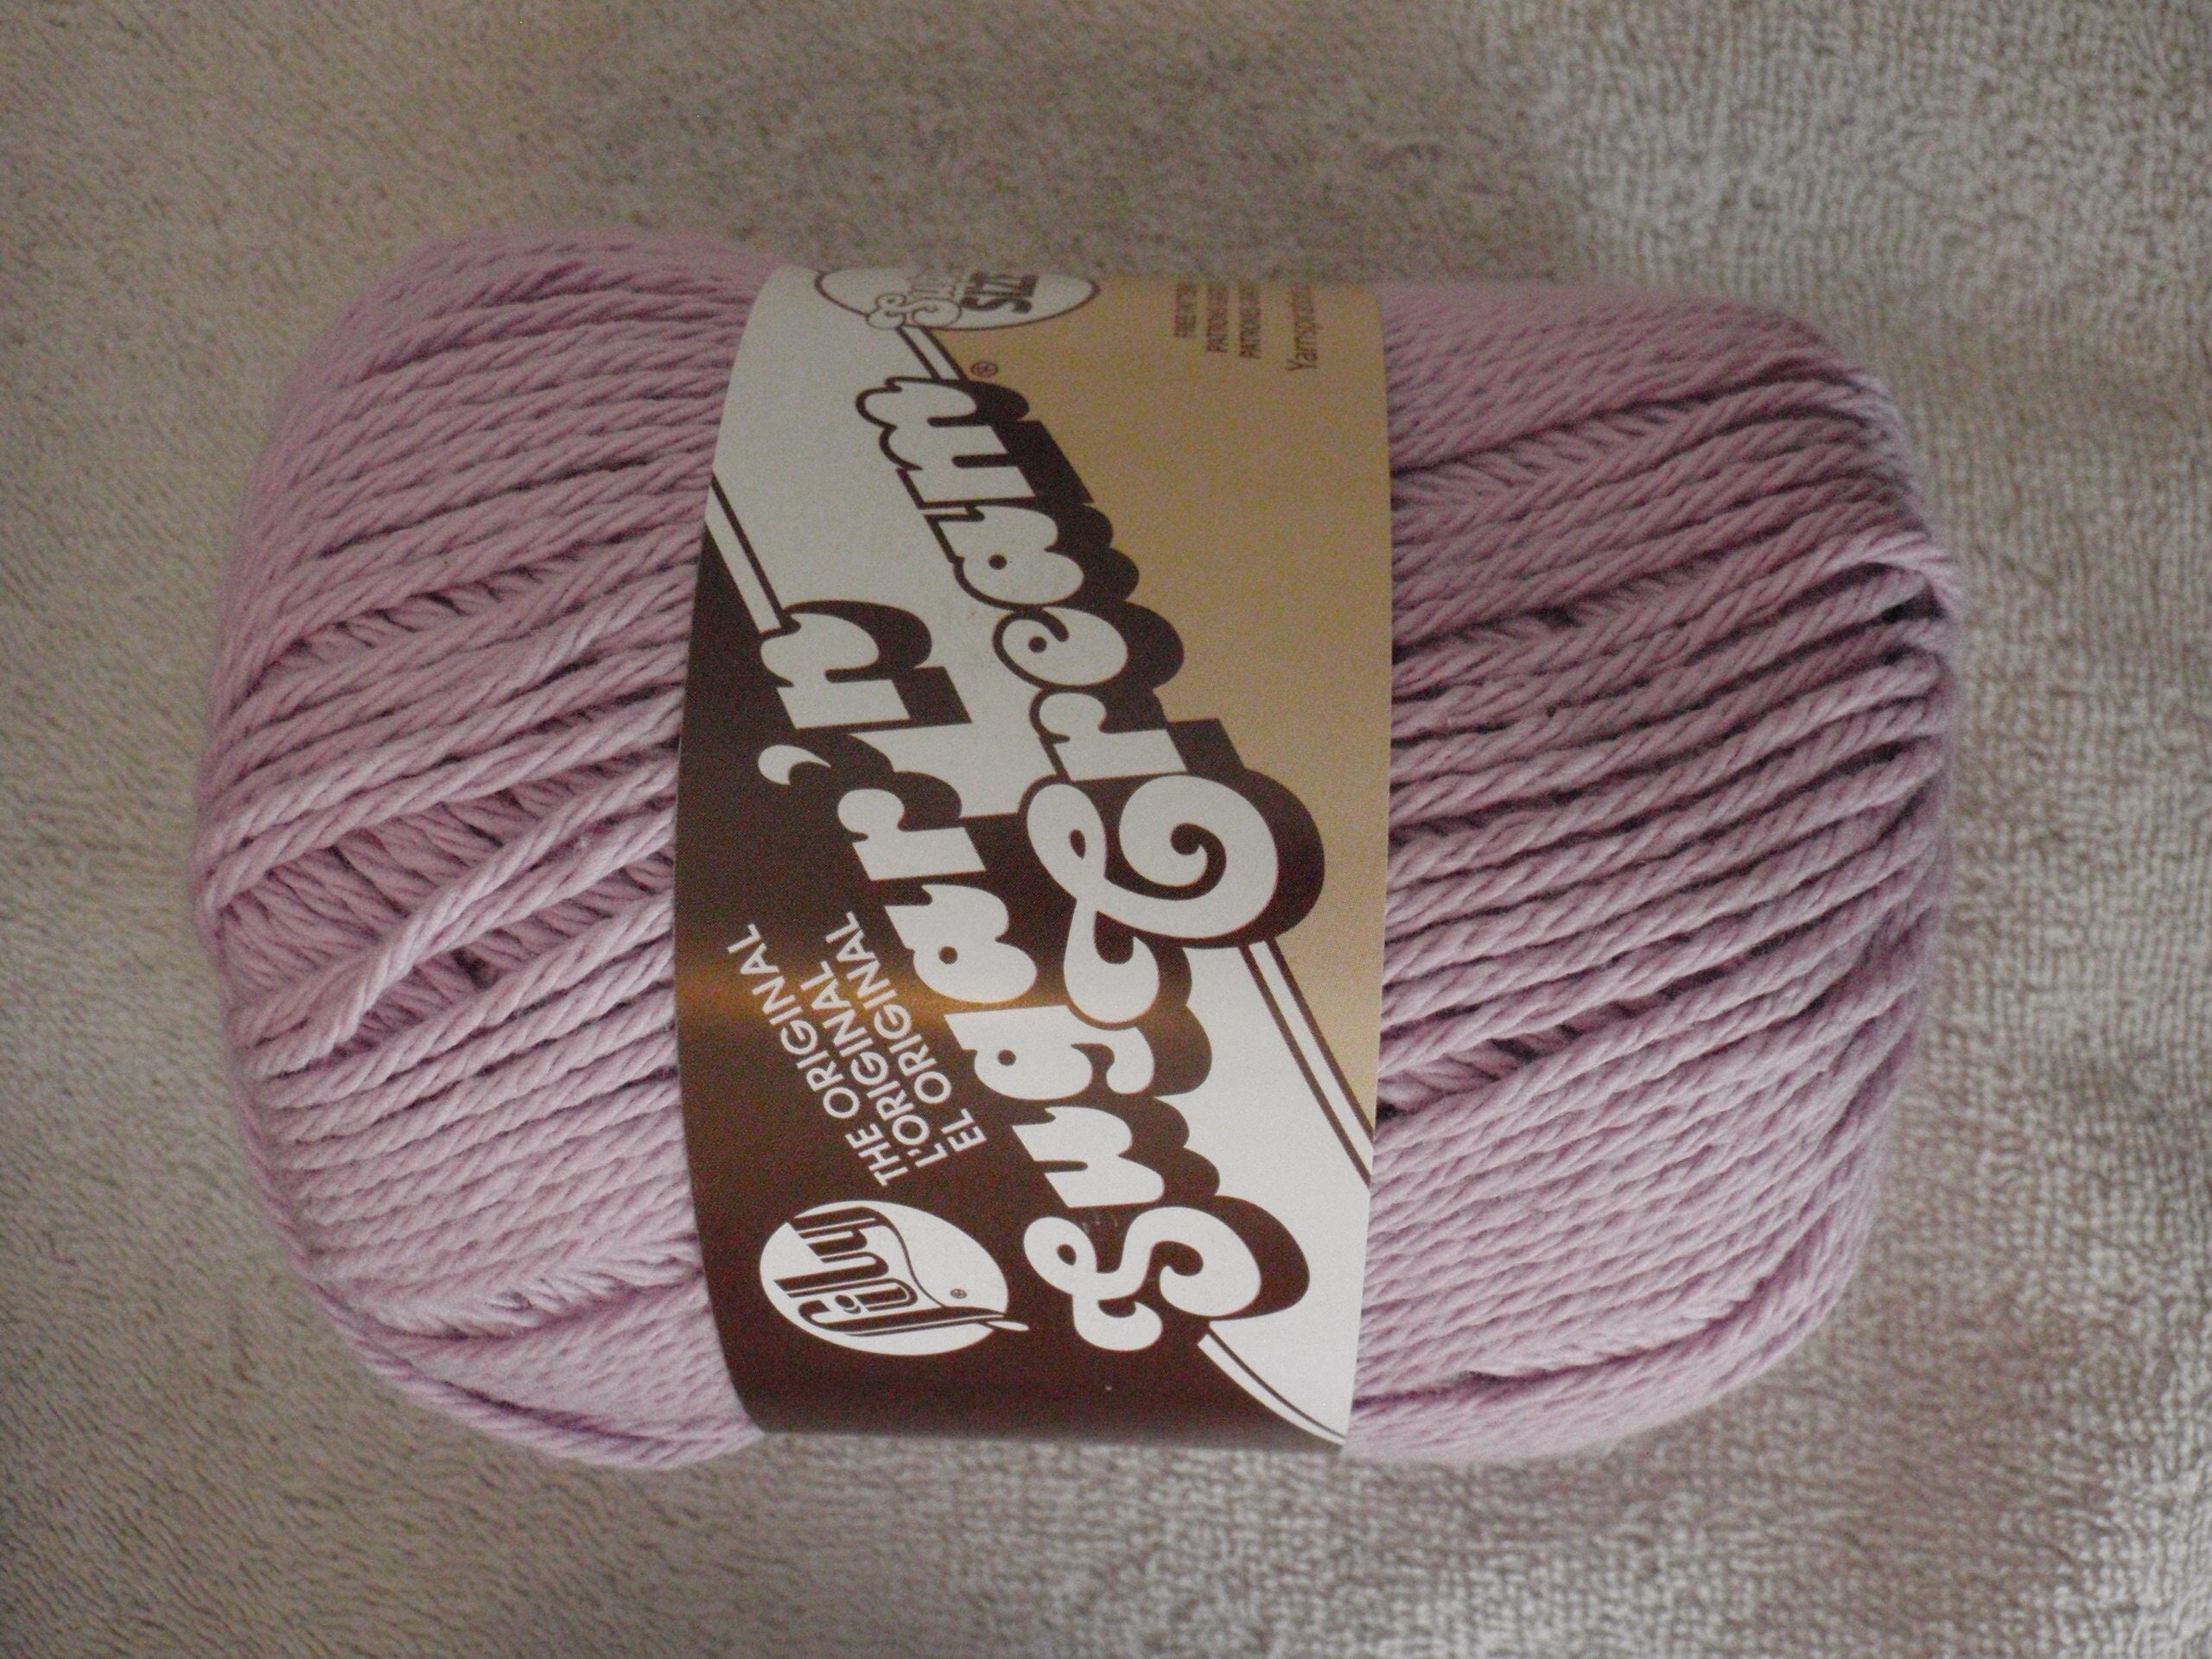 NOVELTY Y A R N. Packs of Novelty Yarns, at Least 3 Yards Each of